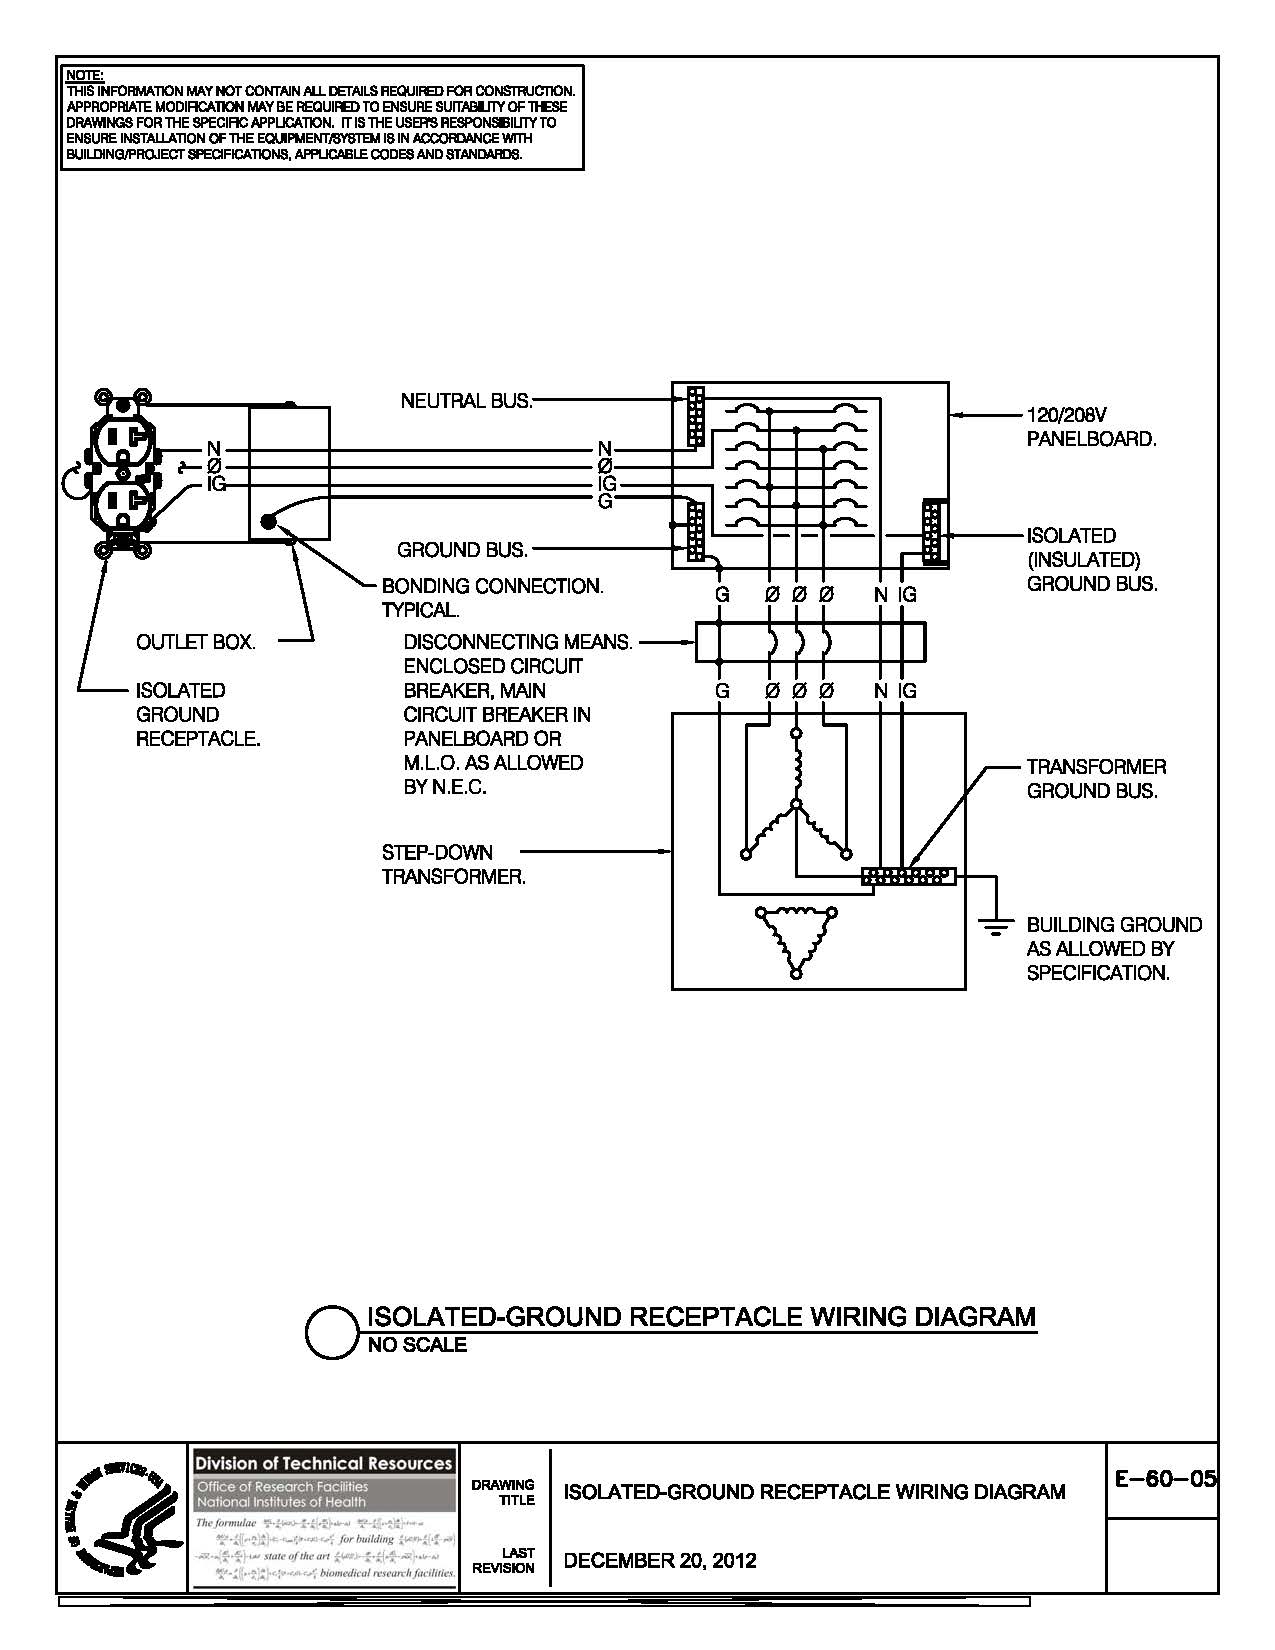 E 60 05_Isolated Ground%20Receptacle%20Wiring%20Diagram